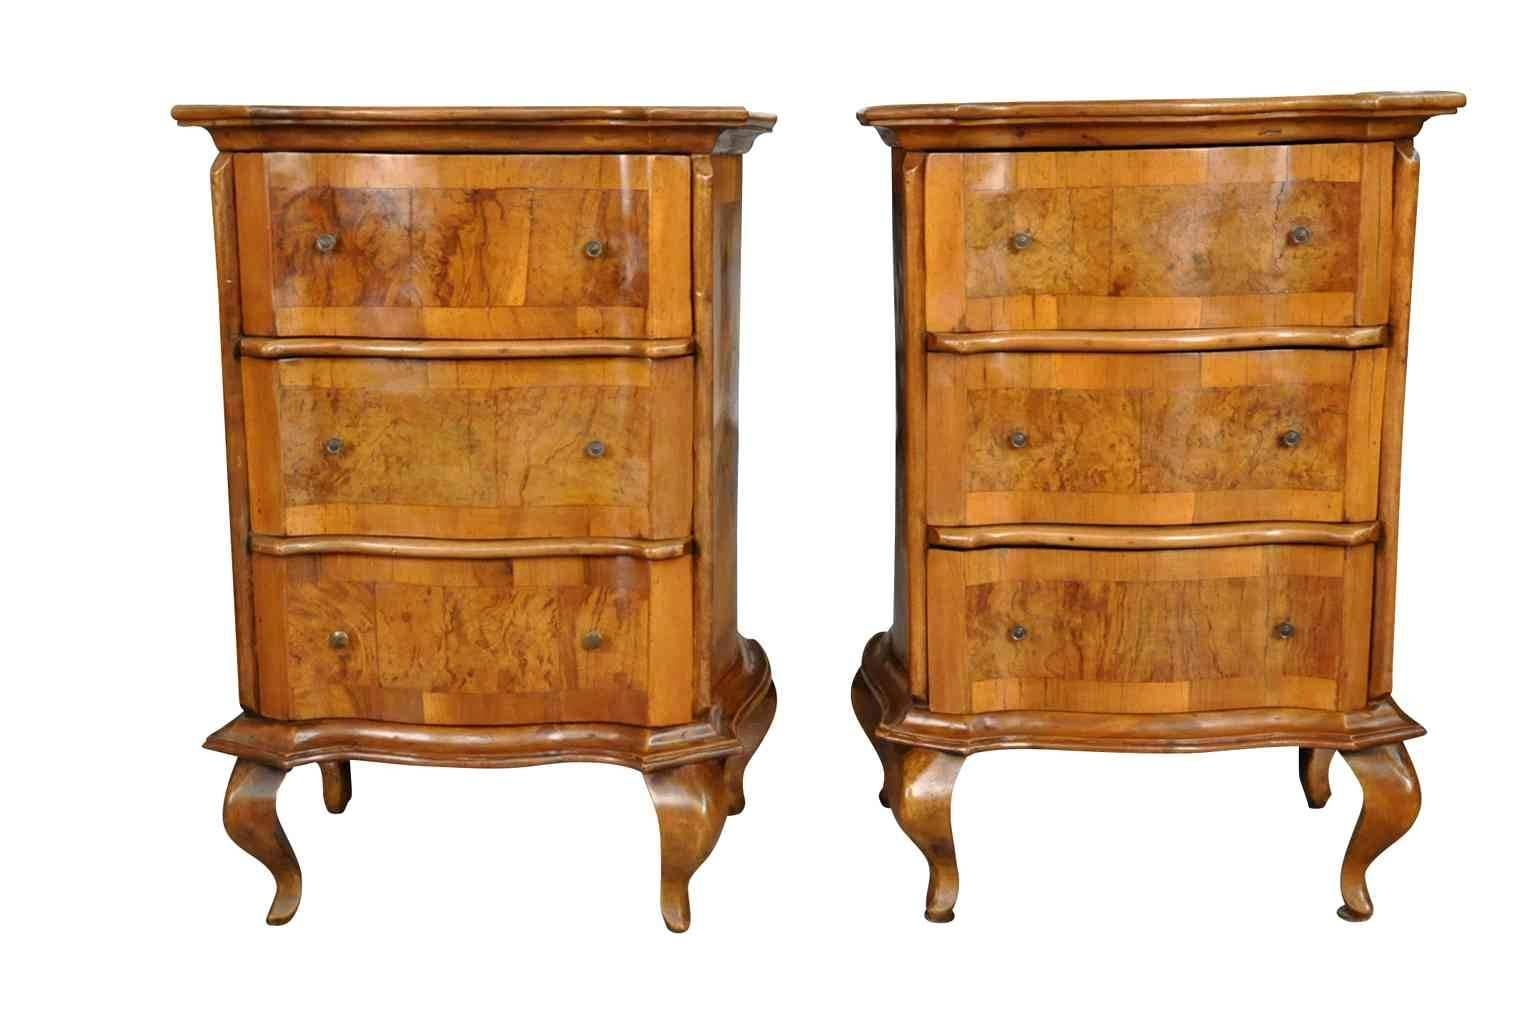 A wonderful pair of later 19th century Comodini or side chests from Northern, Italy. Sound case pieces with thick walnut veneering. Terrific as bedside tables.